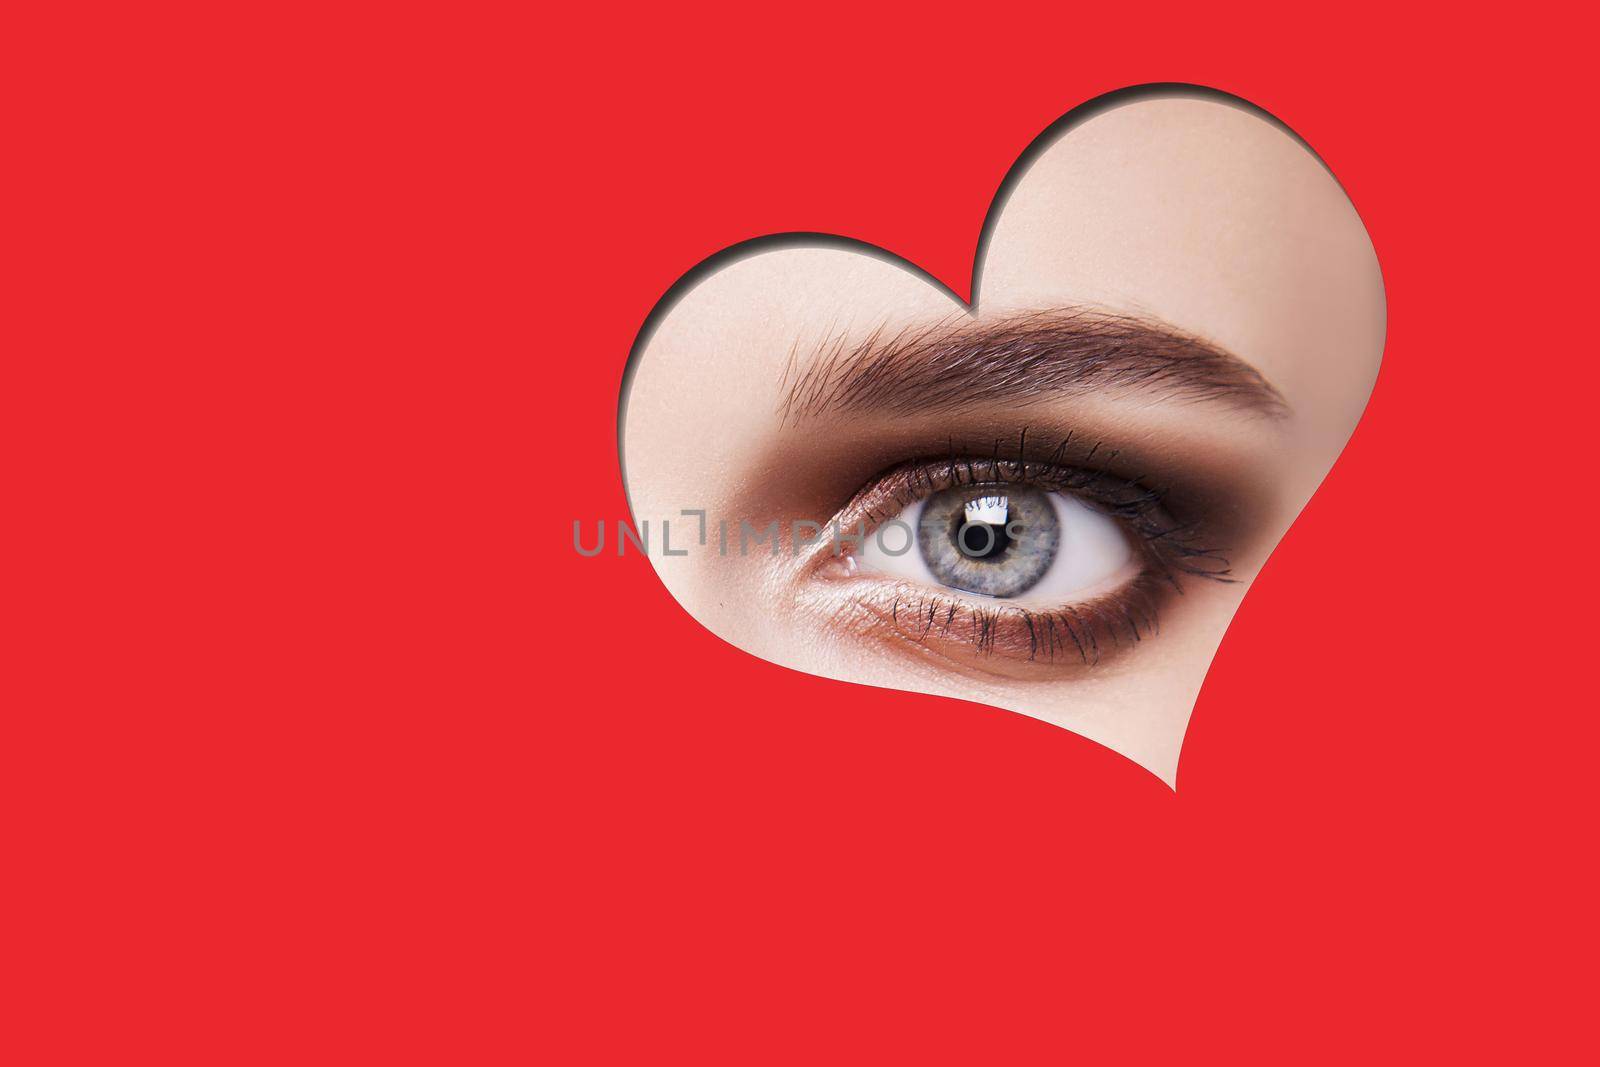 Young beautiful woman with smoky eyes makeup looking at camera through red heart shape. indoor studio shot isolated on red background.